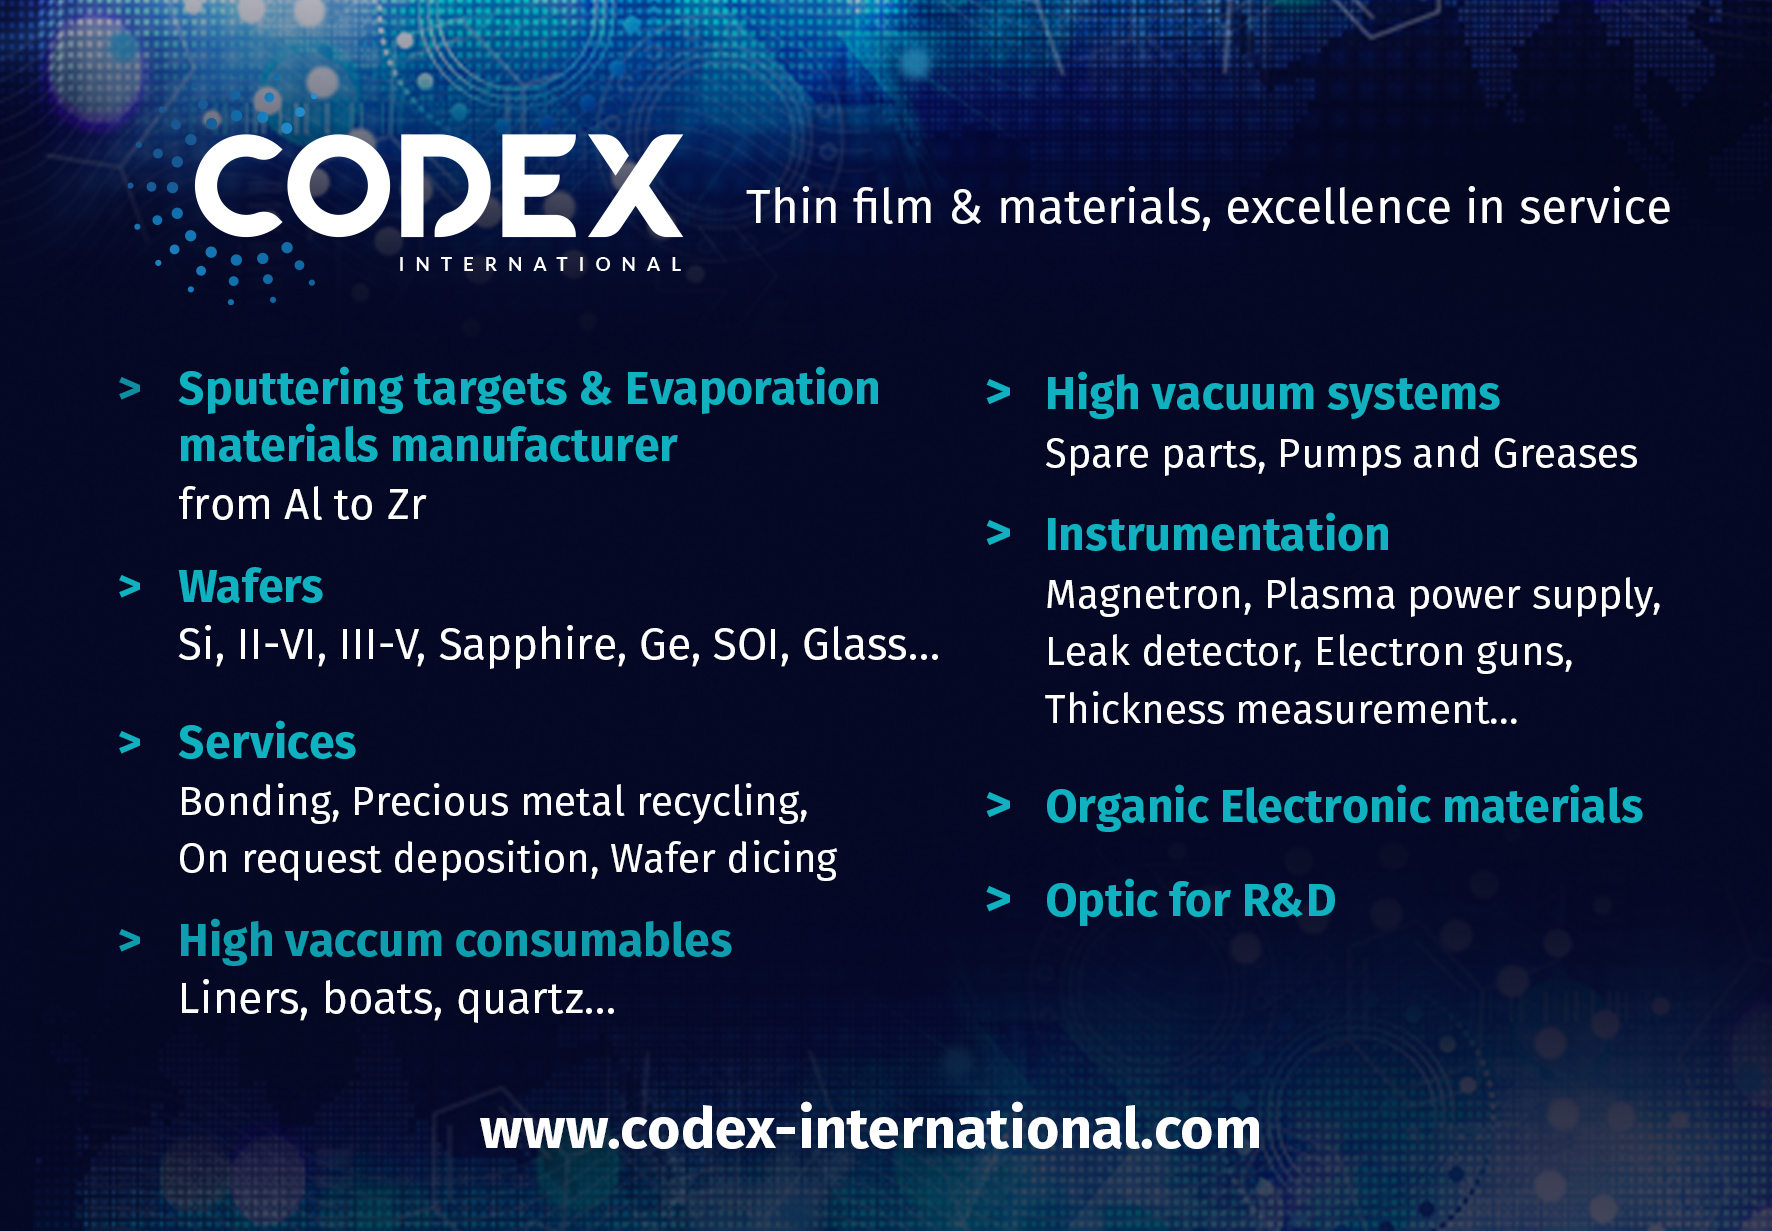 Codex International - Thins film & materials, excellence in service.